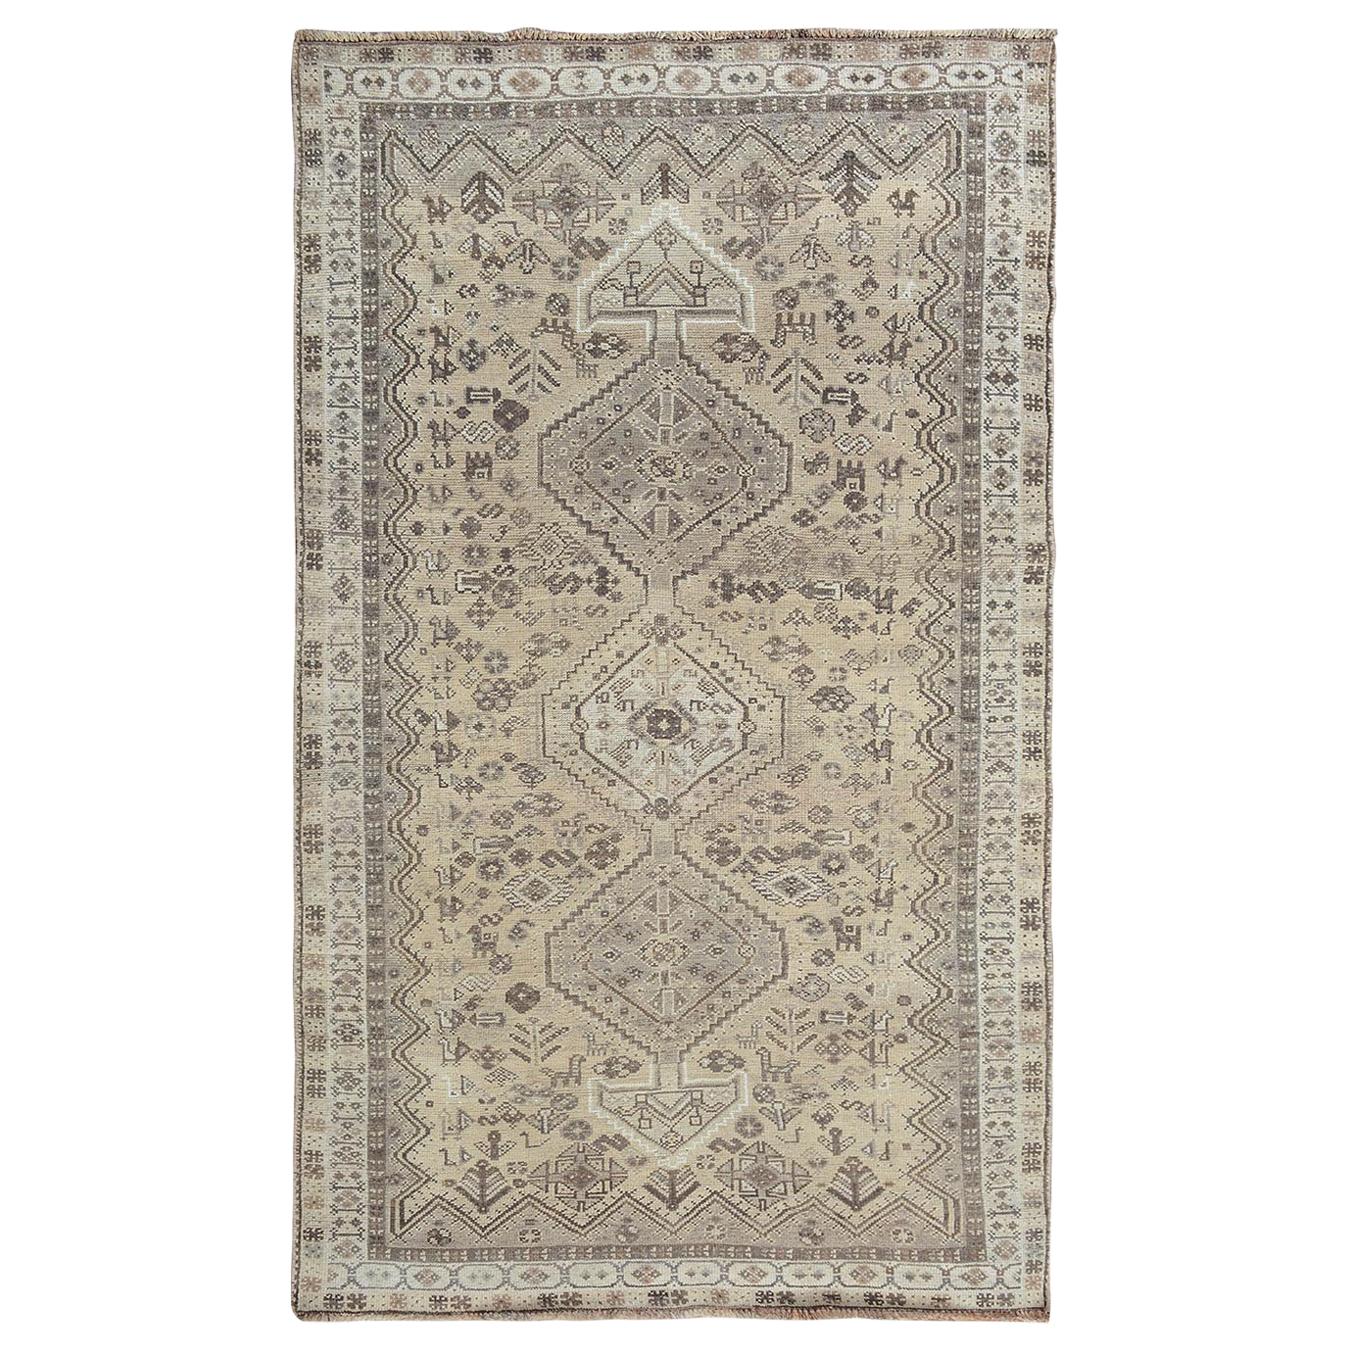 Earth Tone Colors Old and Worn Down Persian Qashqai Pure Wool Hand Knotted Rug For Sale